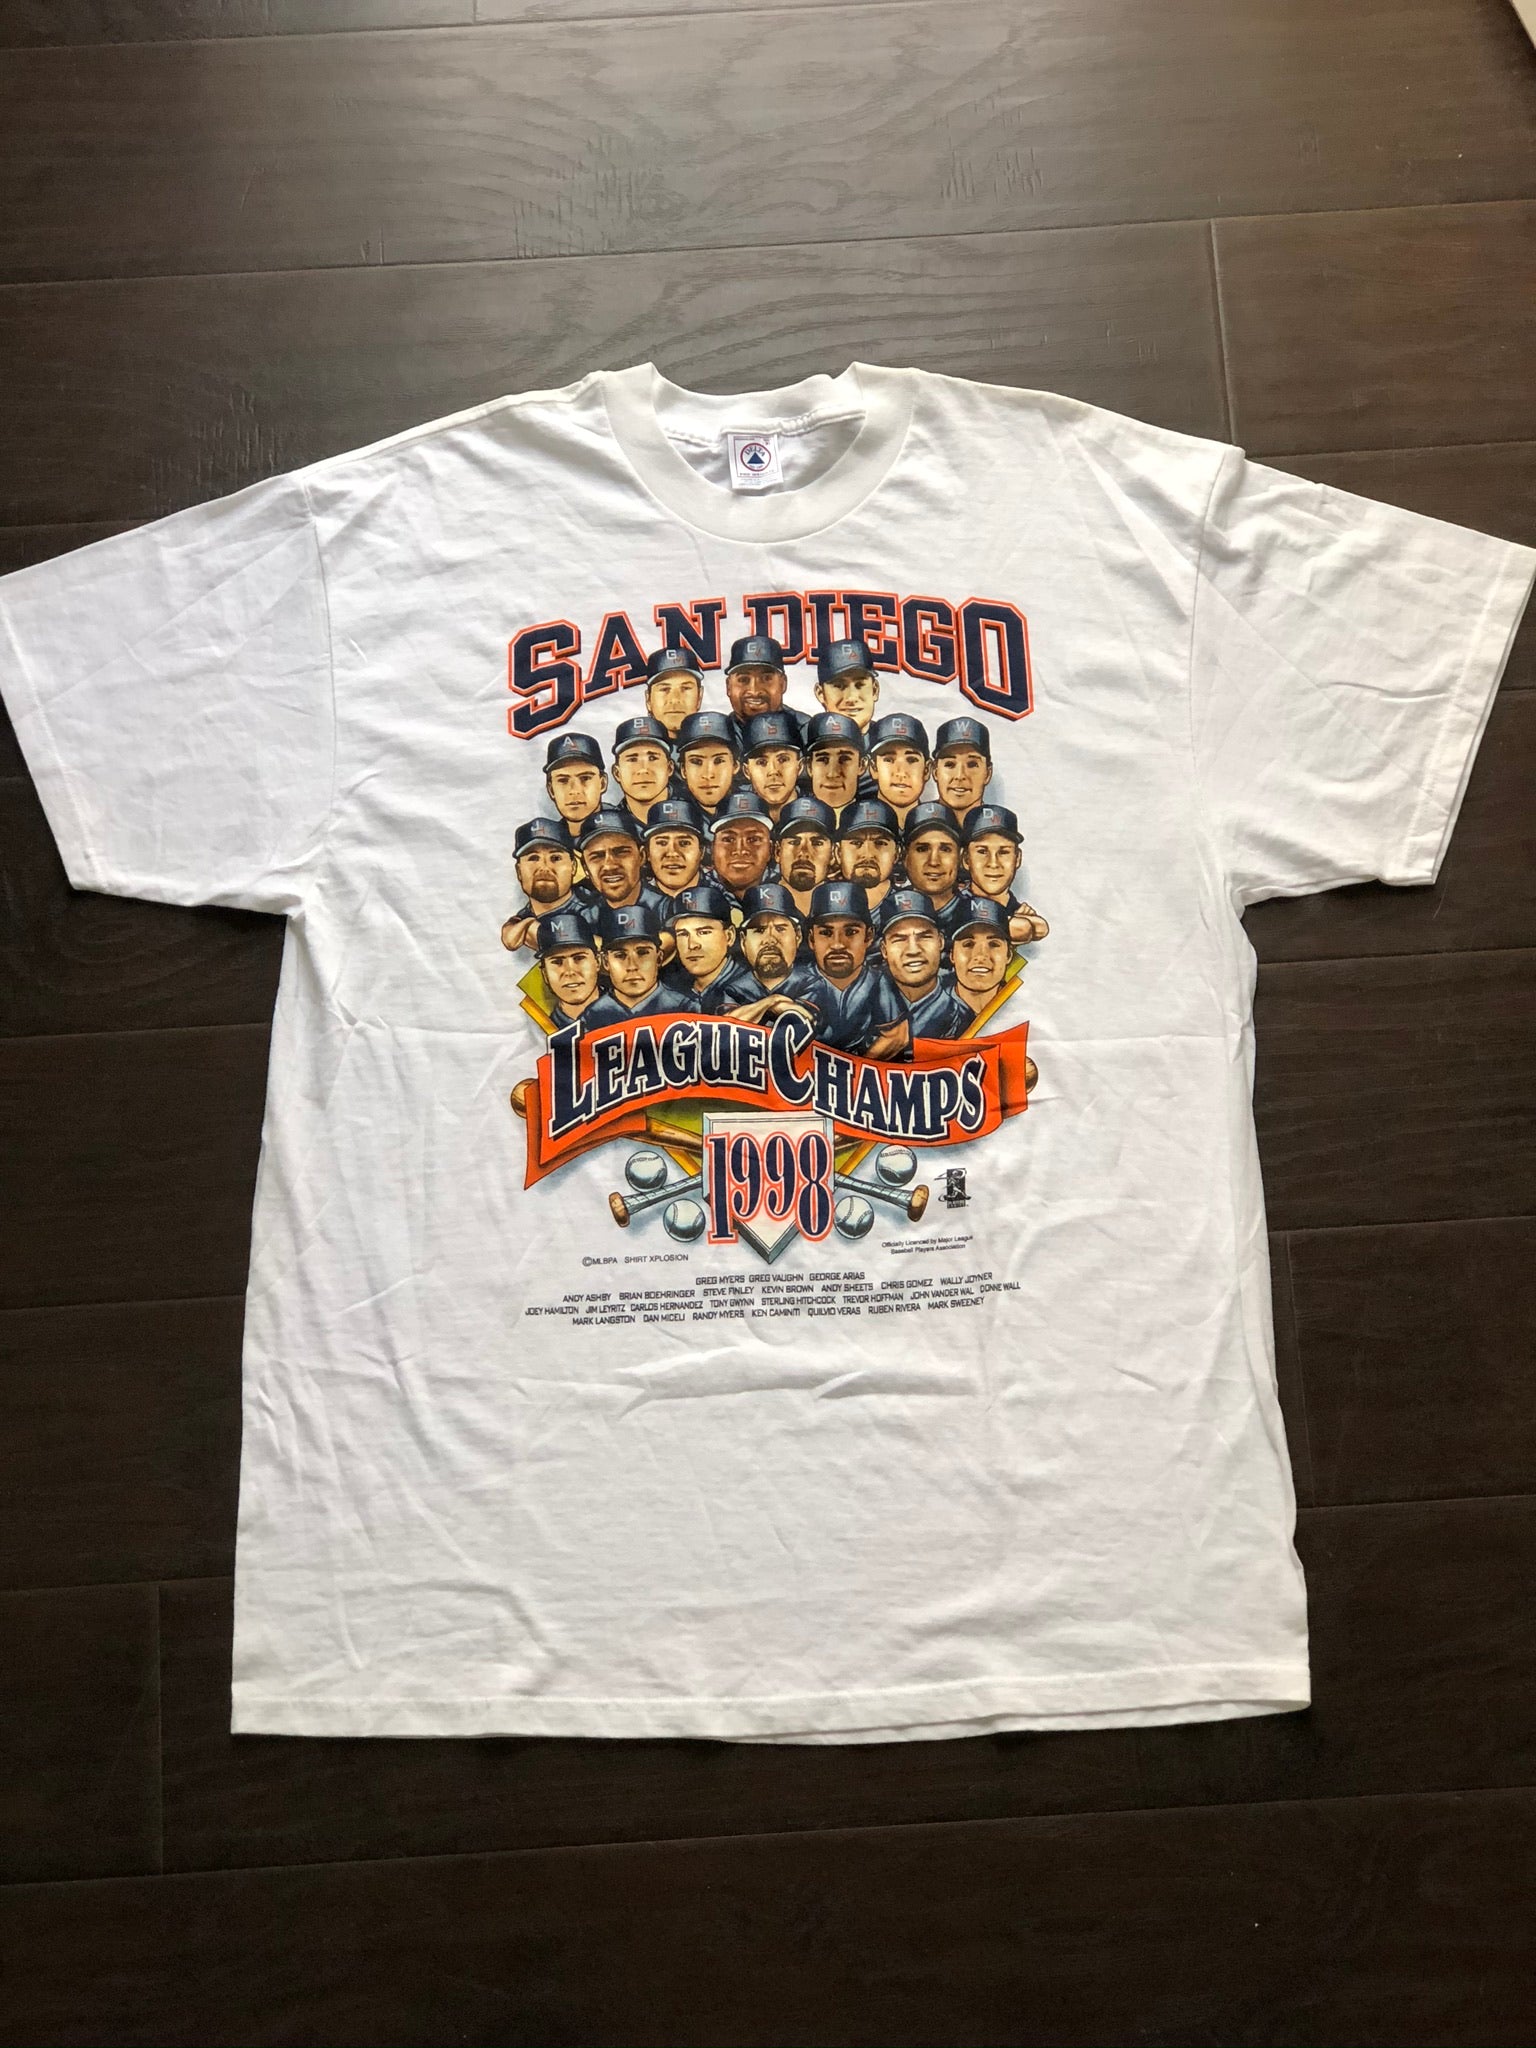 Padres Honour 98 Champs With Throwback Unis – SportsLogos.Net News